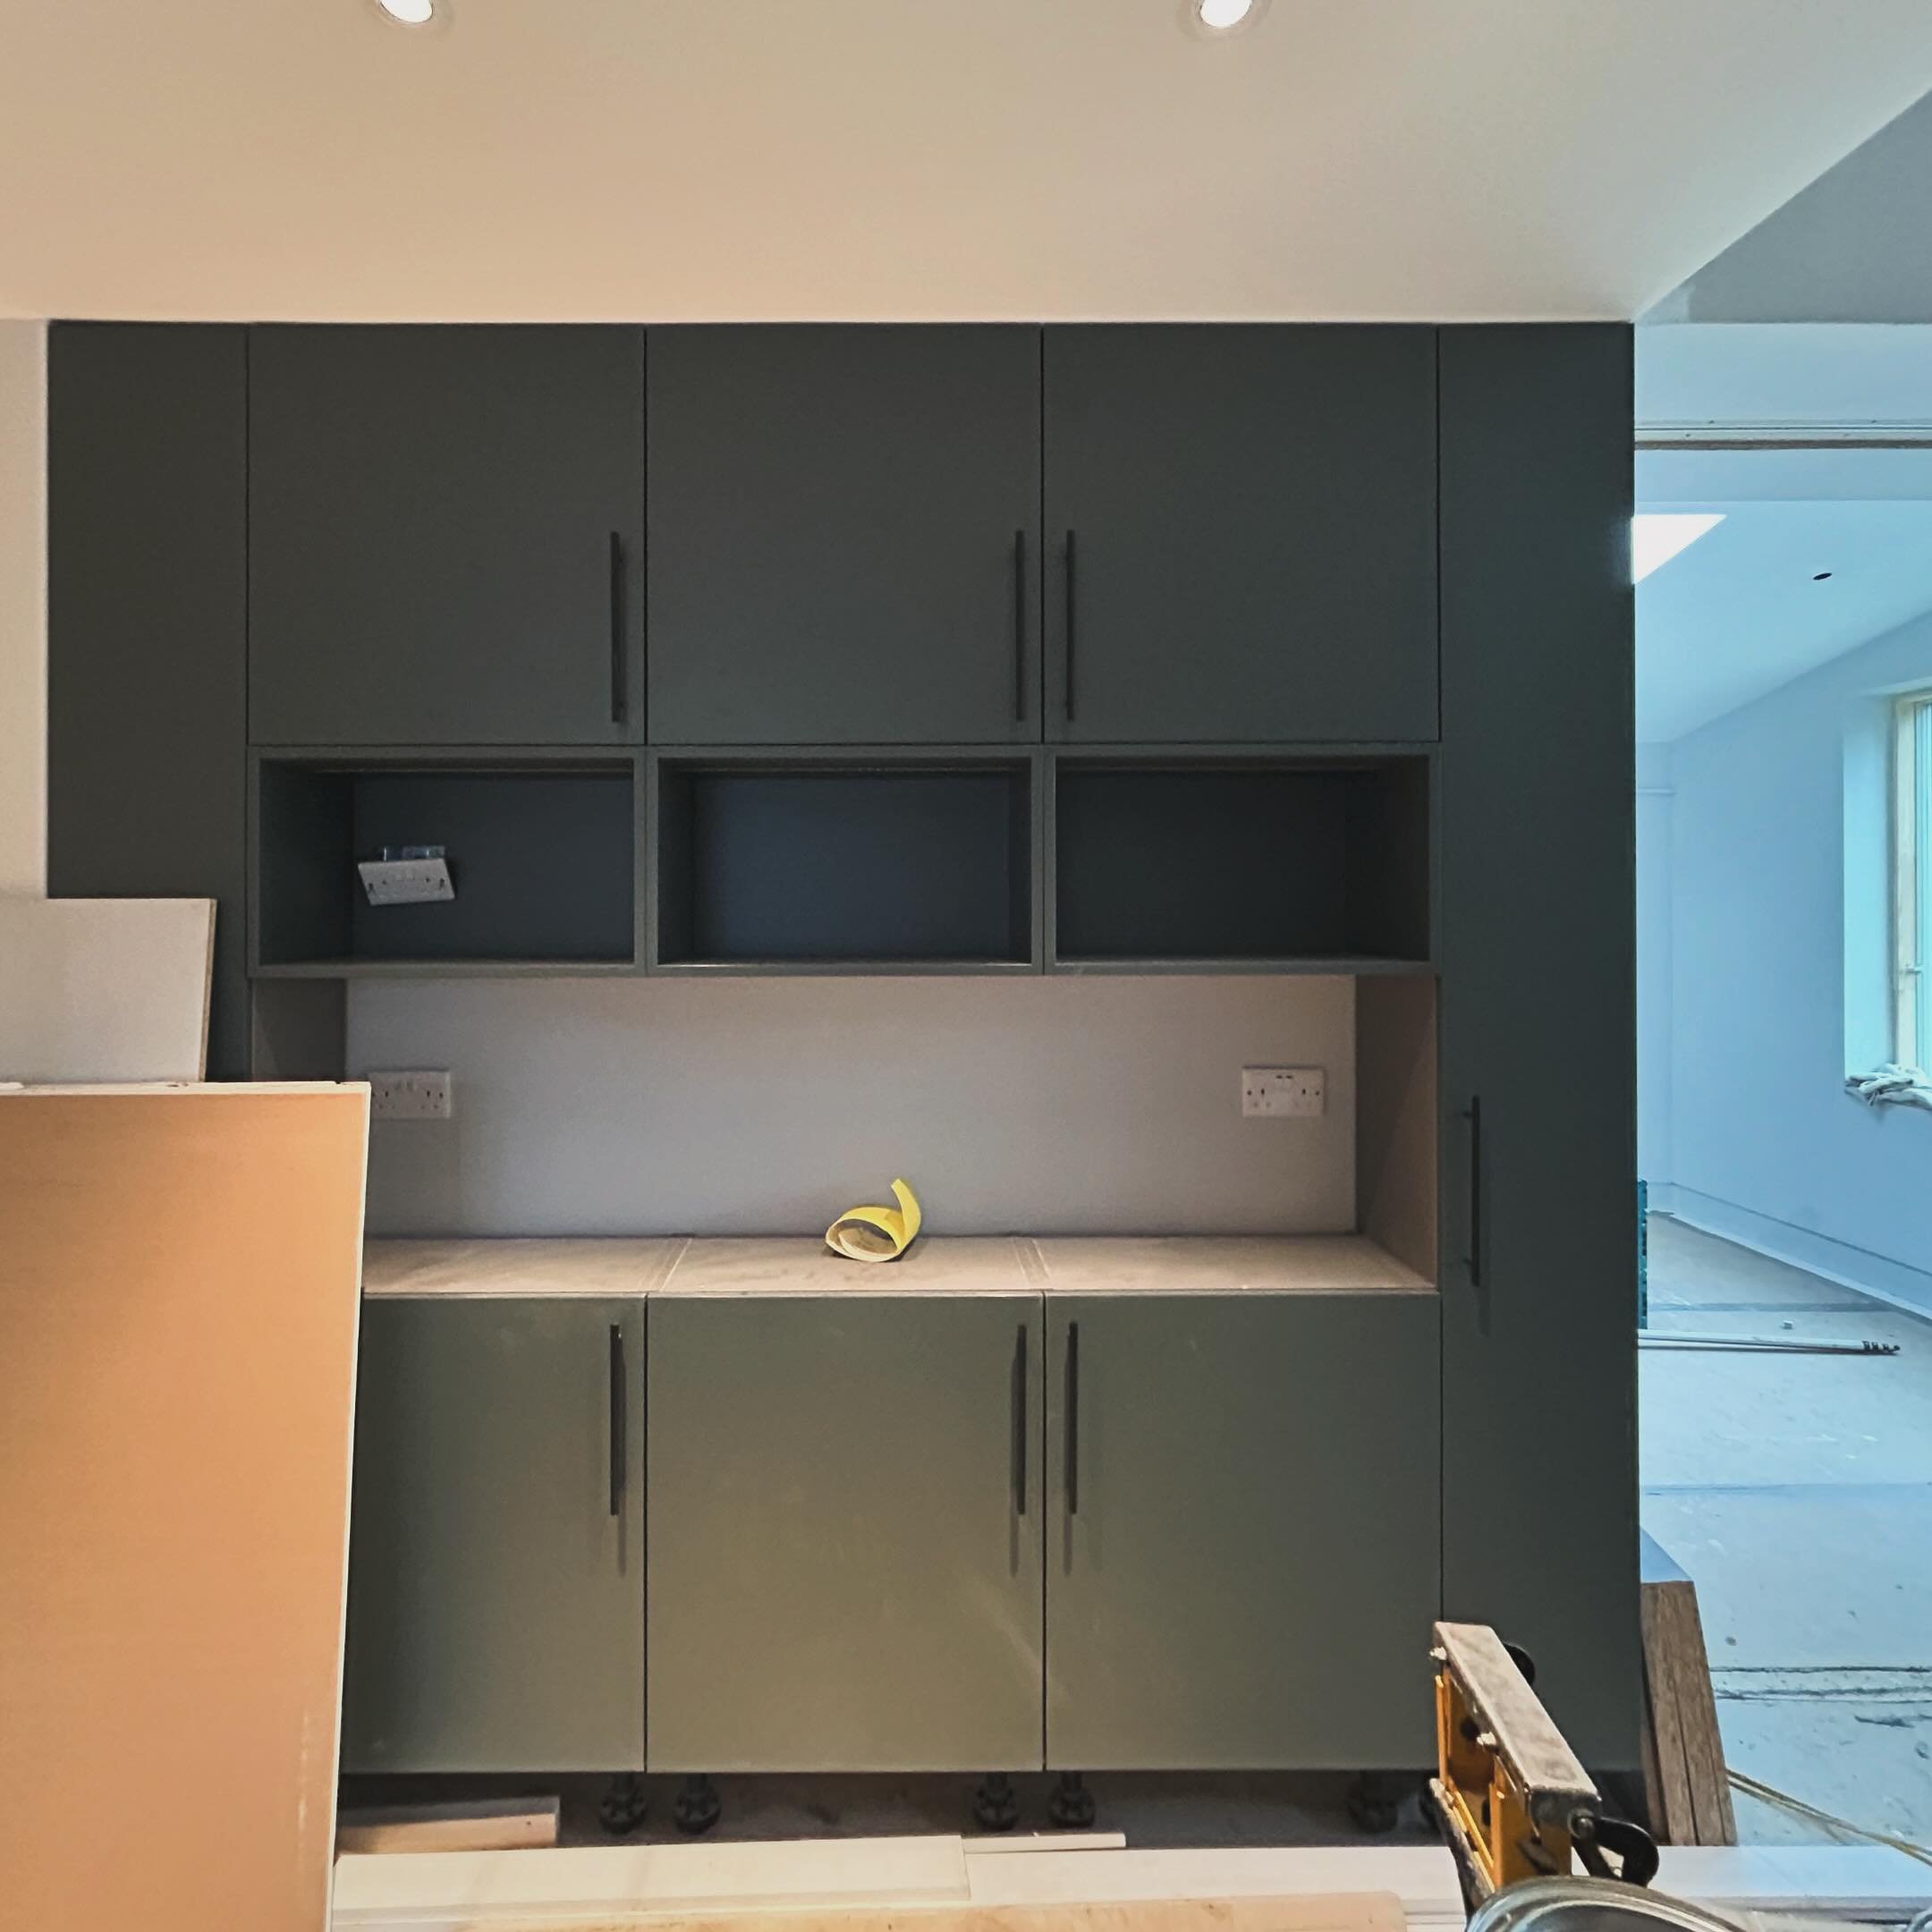 It&rsquo;s the end of another week and it was great to see one of our own bespoke designed kitchens being installed in Cambridge this afternoon. We can&rsquo;t wait to see it come together with the beautiful Douglas Fir panels and green slate worktop